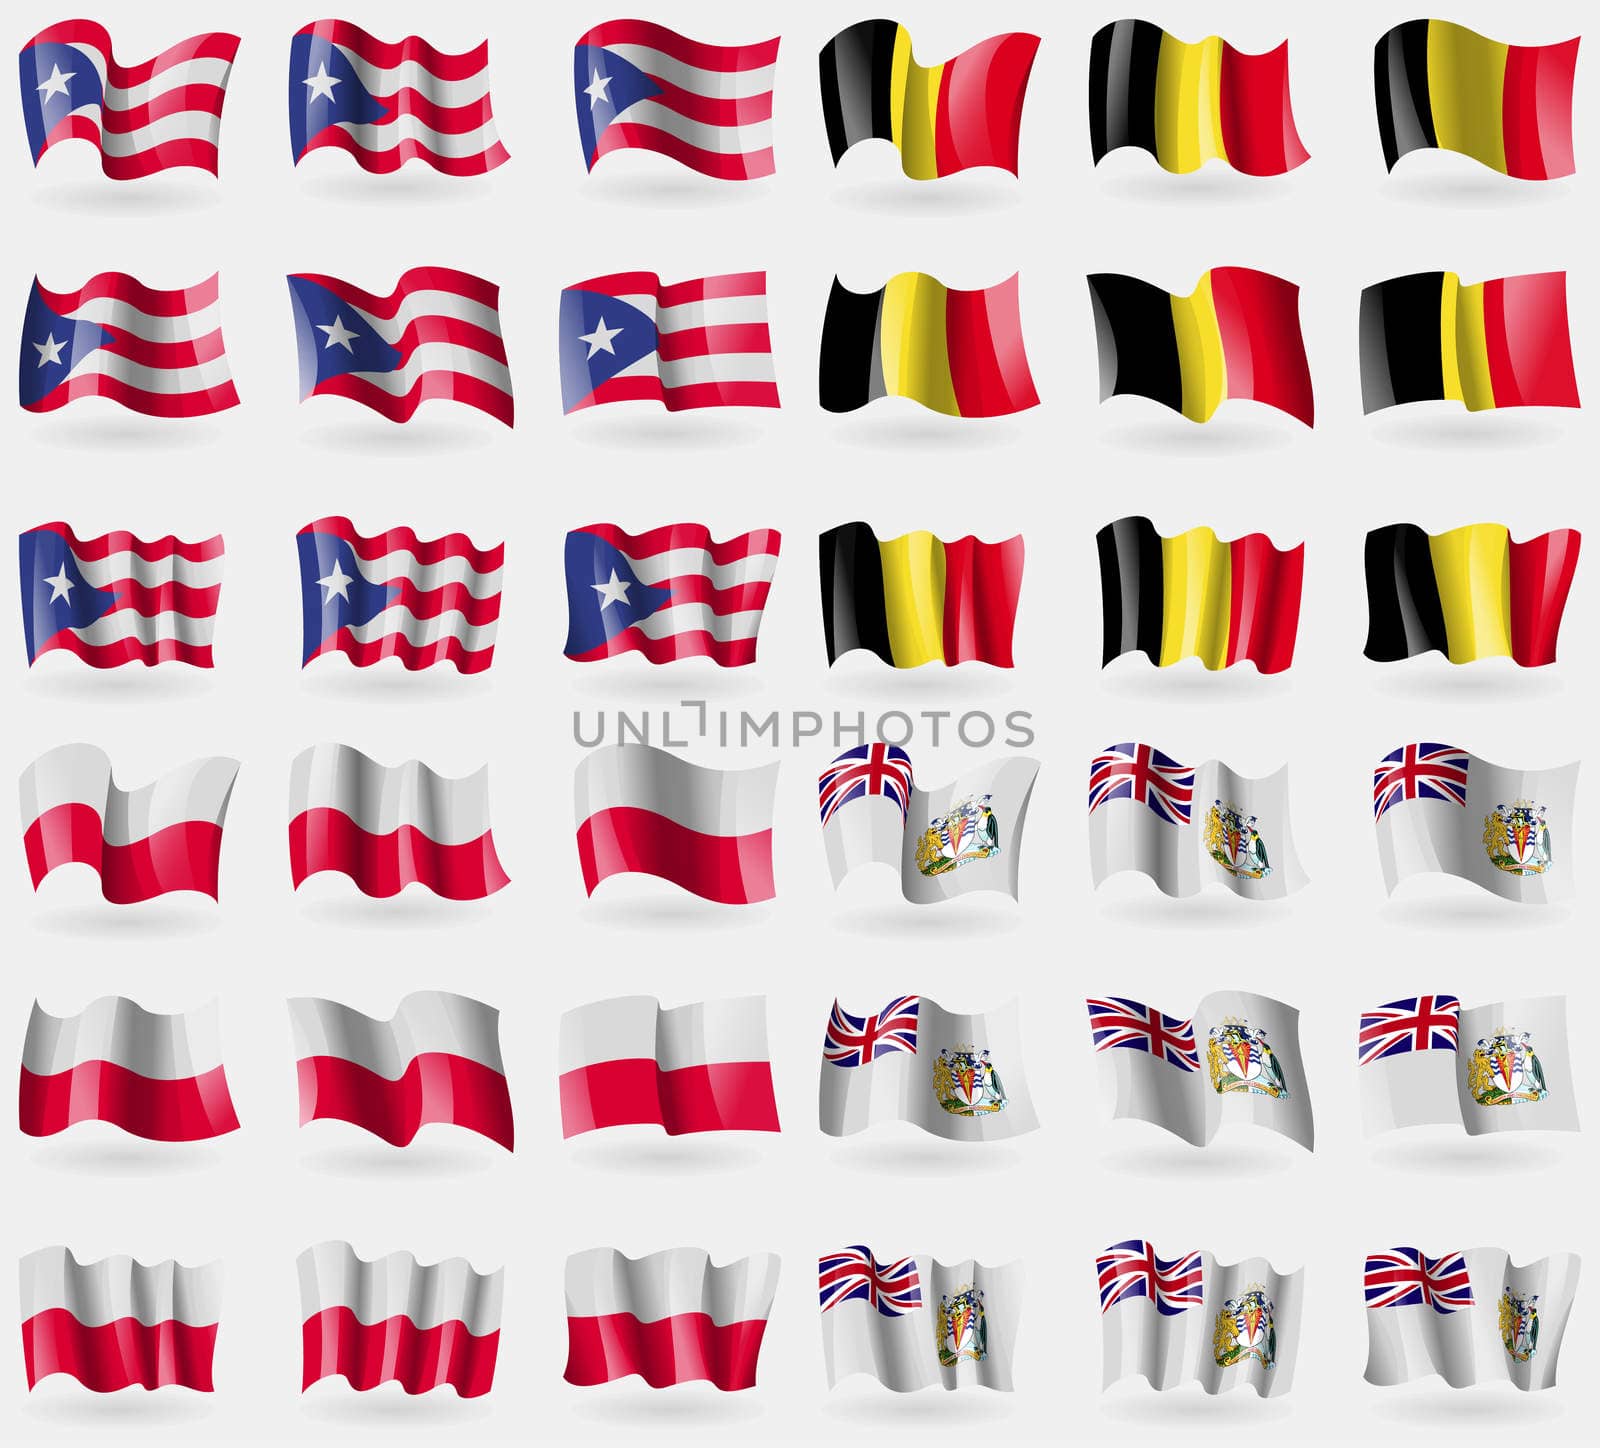 Puerto Rico, Belgium, Poland, British Antarctic Territory. Set of 36 flags of the countries of the world. illustration